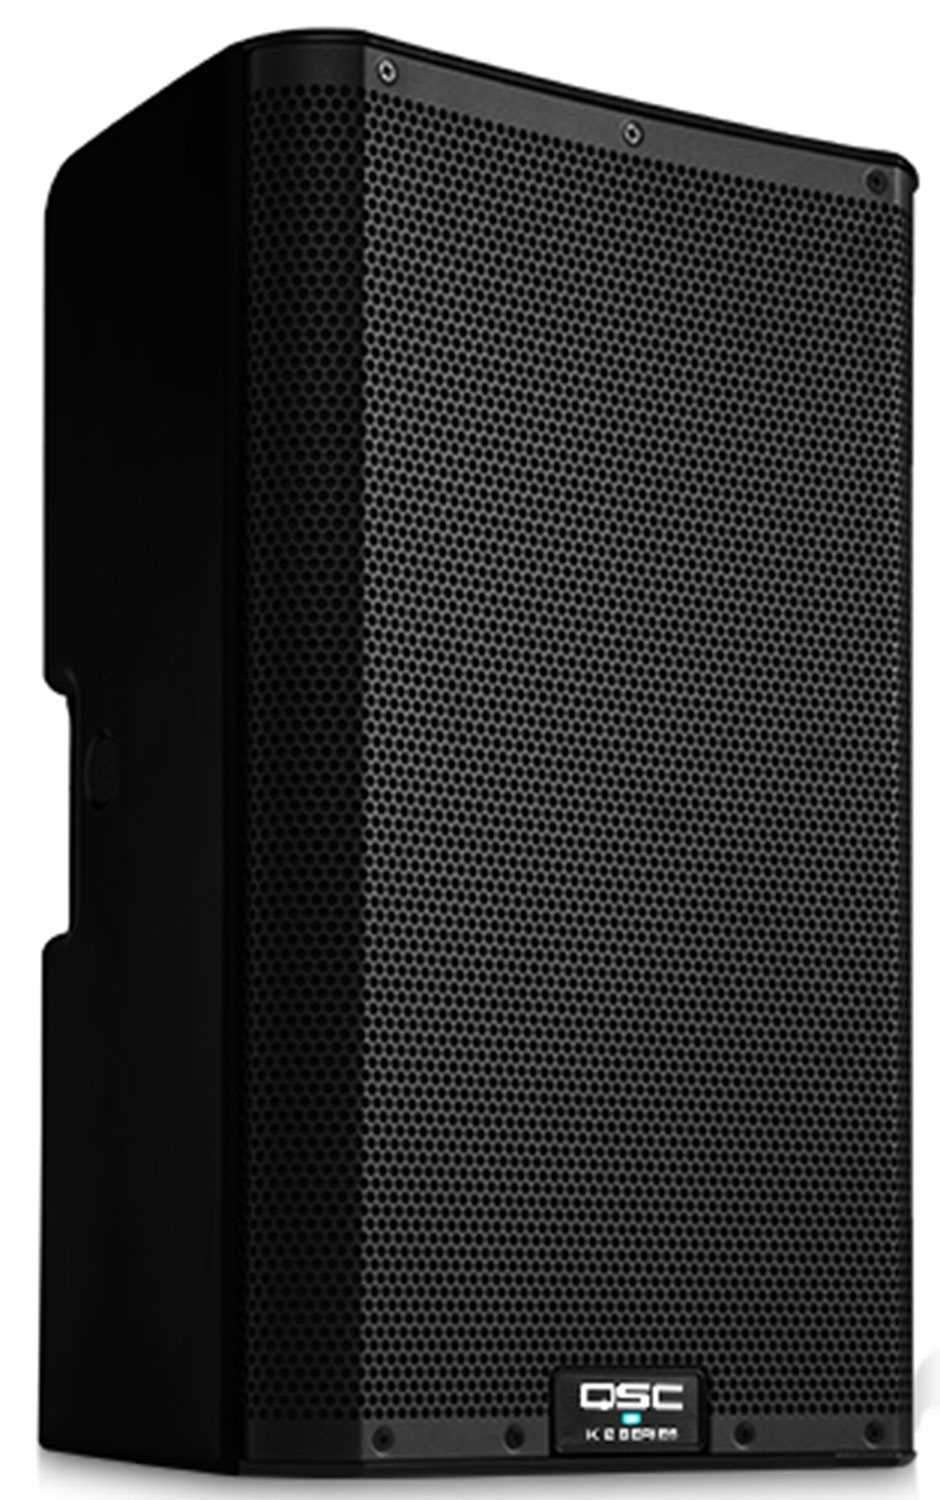 QSC K12.2 Speakers & Ultimate TS-100-B Stands with Gator Totes - PSSL ProSound and Stage Lighting